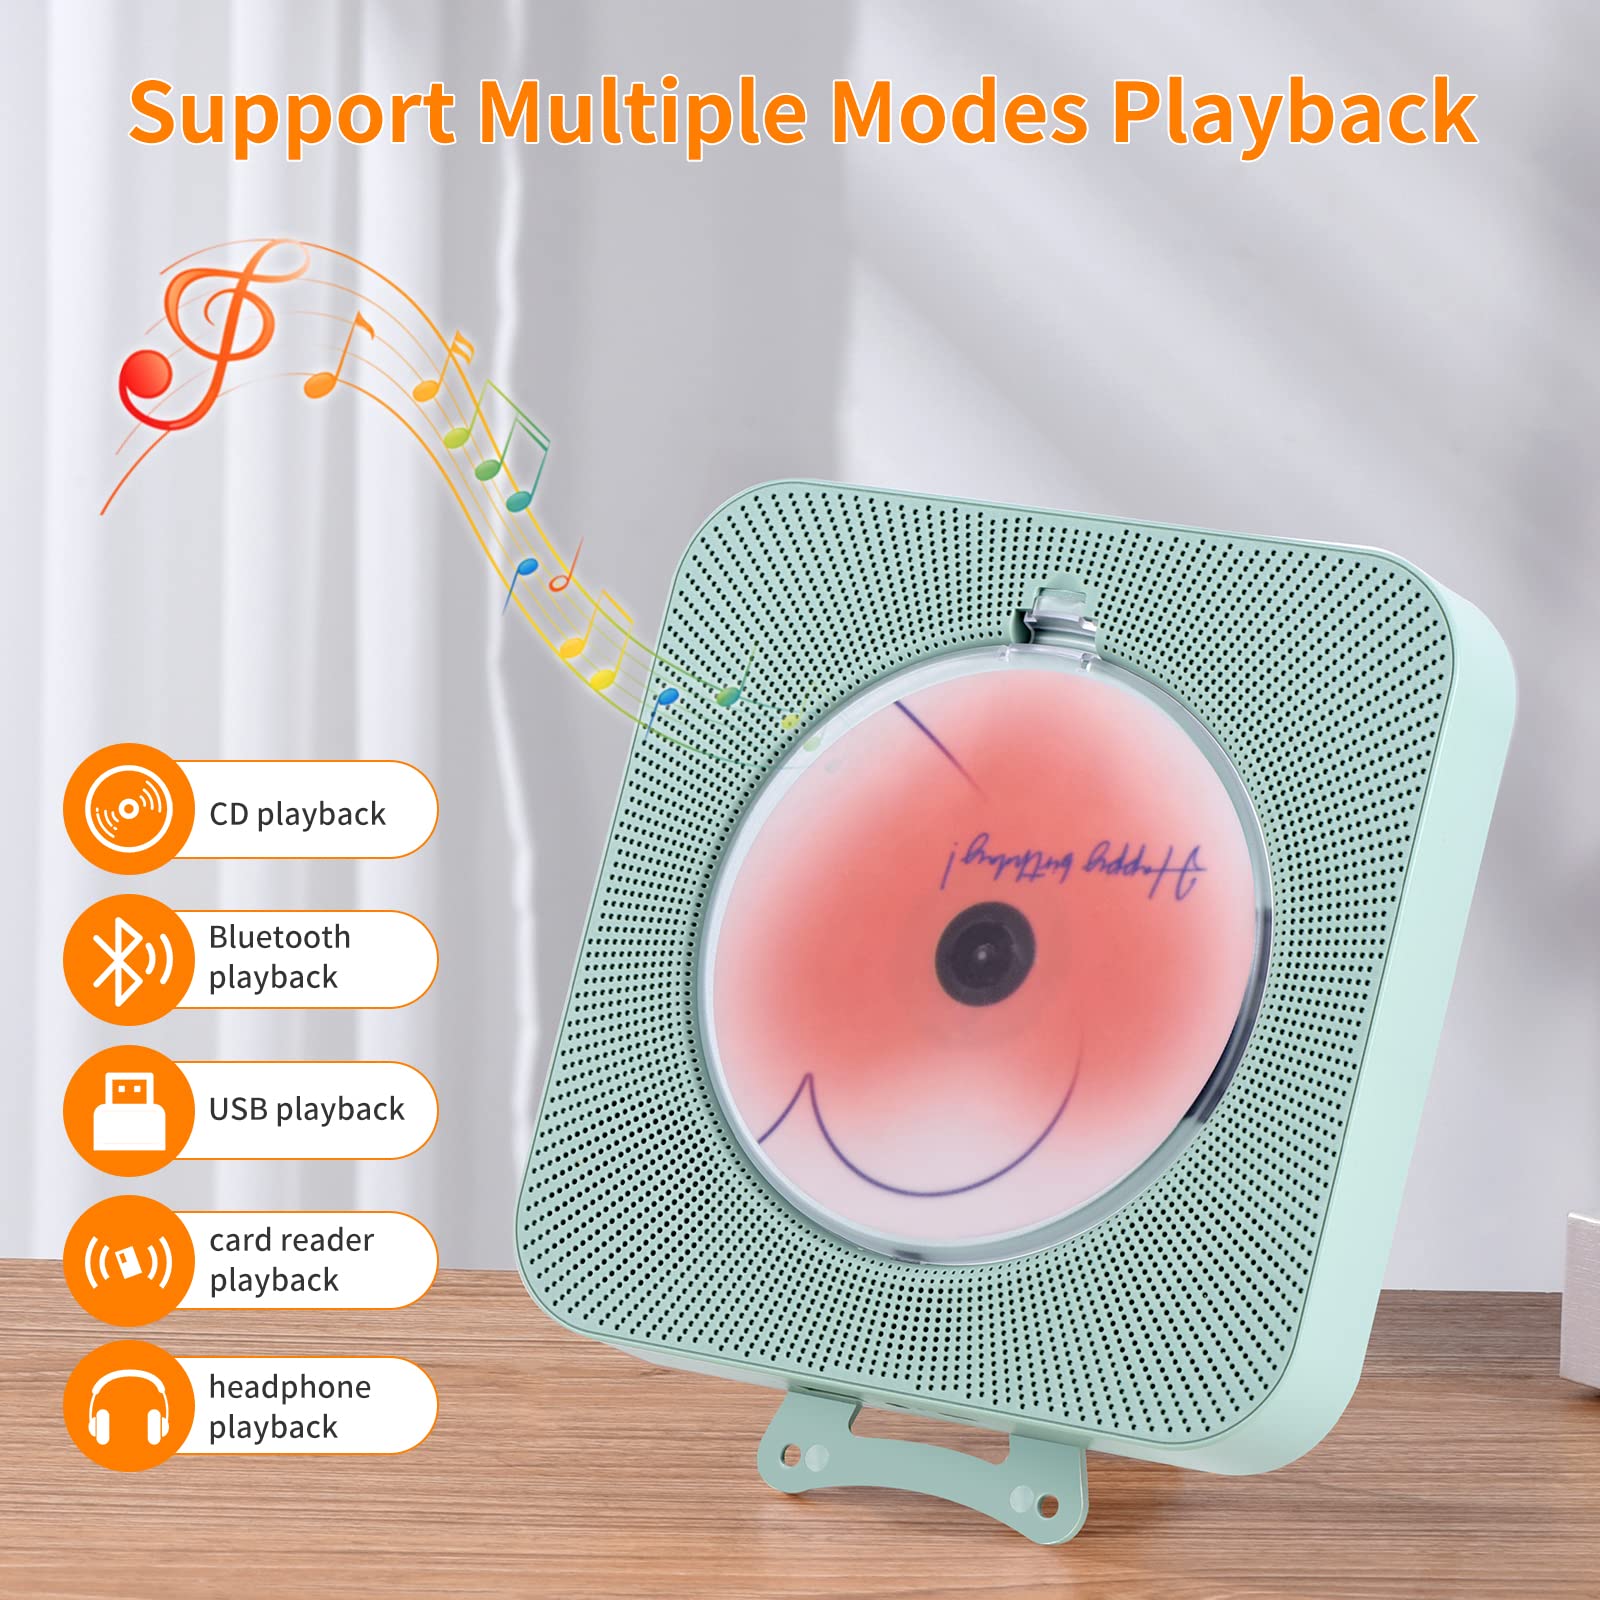 Yintiny Cute Green CD Player with Bluetooth 5.0, Rechargeable Music Player for Home Decor, Portable Lovely Music Player, Remote Control, Support AUX in Cable&USB, Kpop Music Album